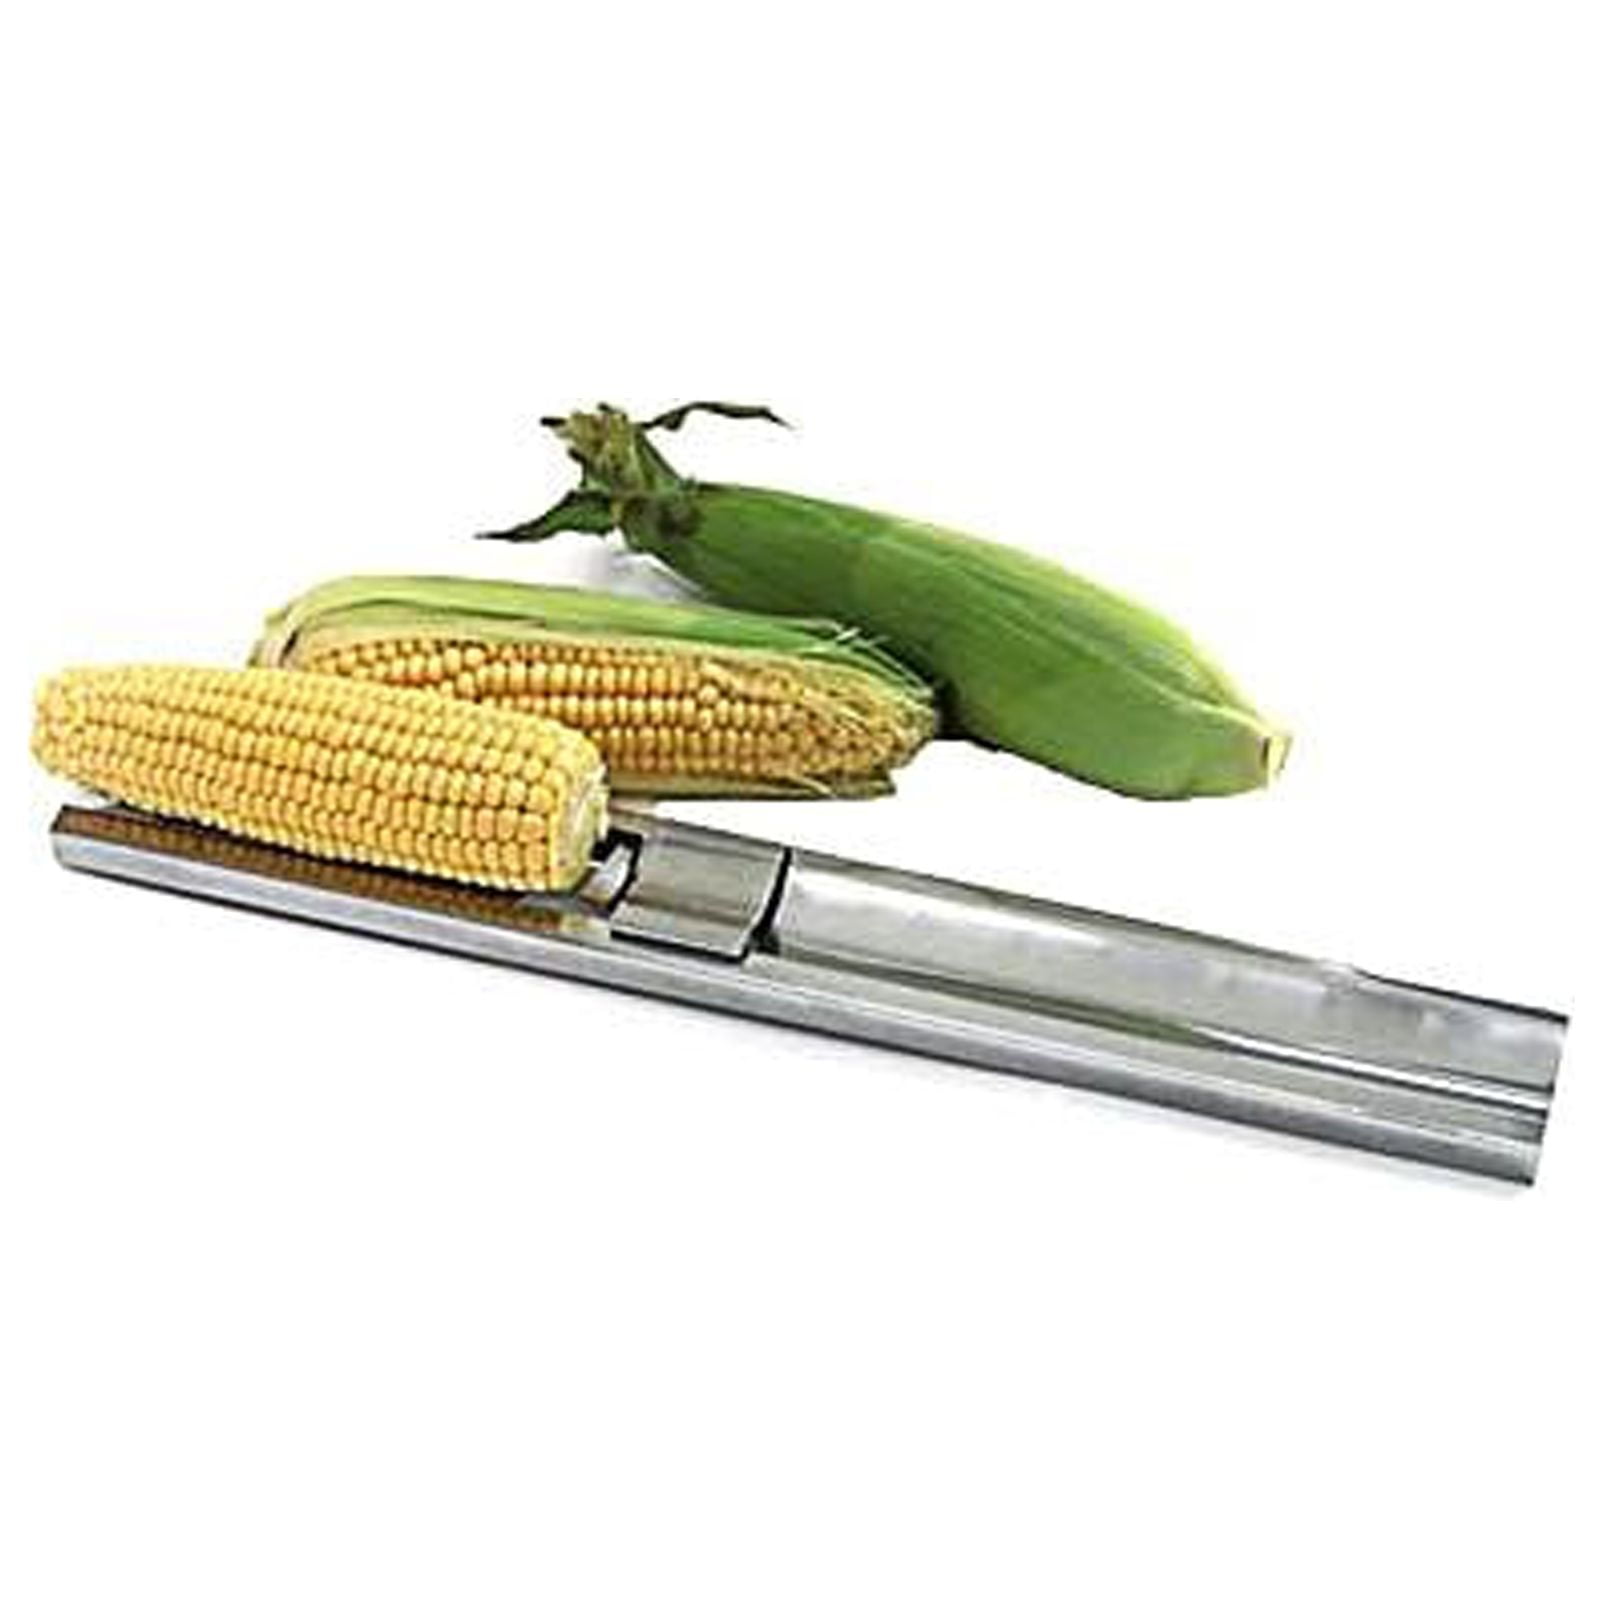 This OXO Peeler Strips Kernels Off Corn Cobs with Ease According to Shoppers